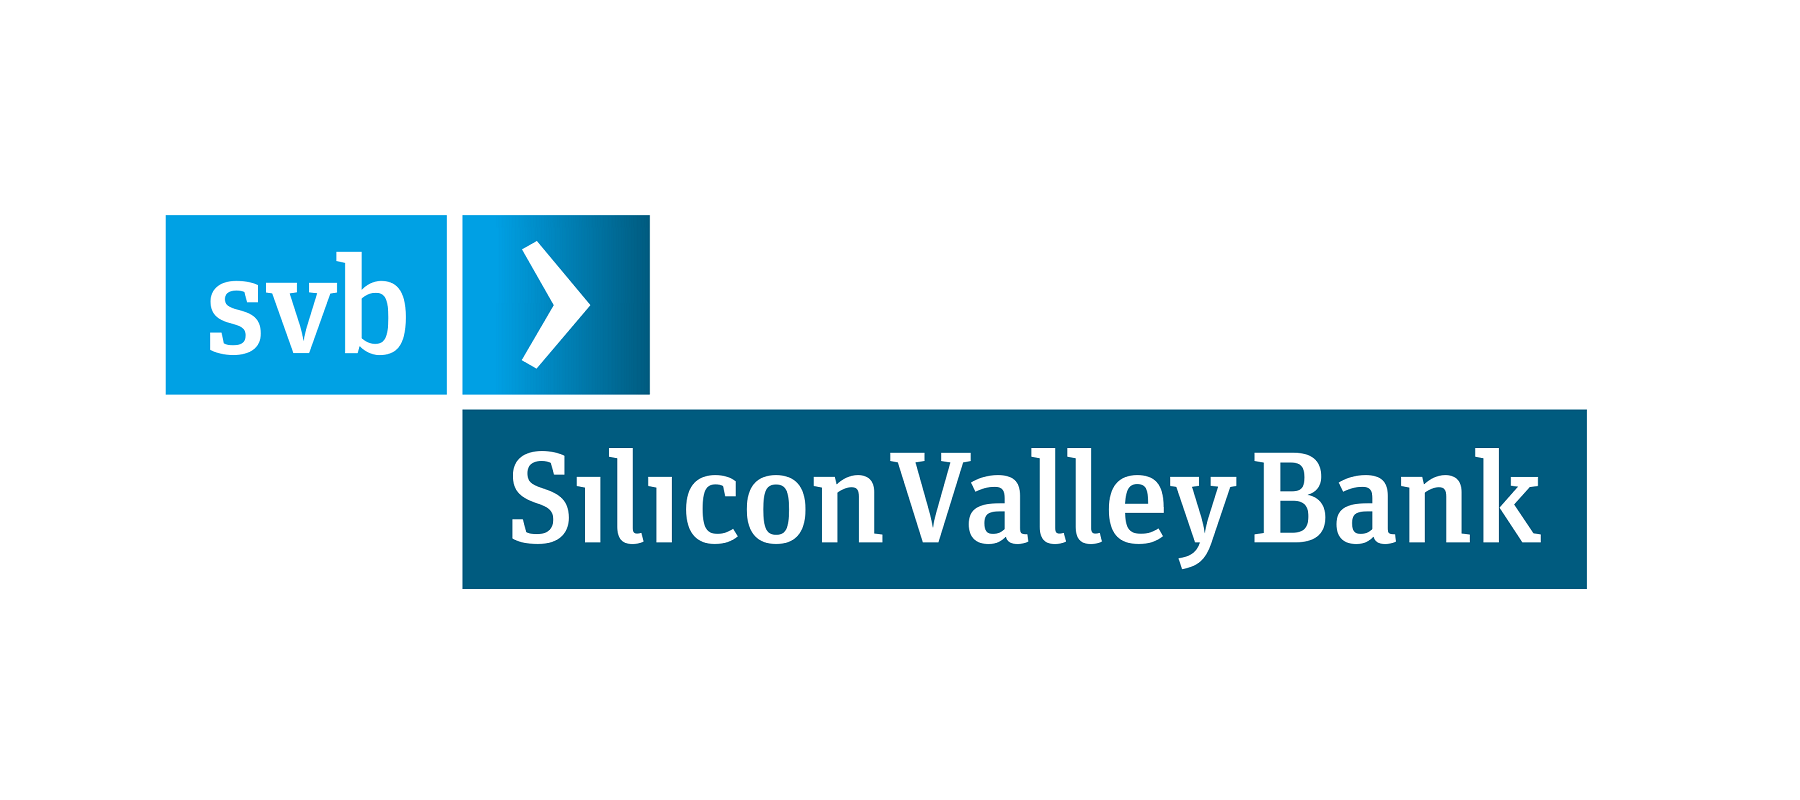 Silicon Valley Bank launches marketing campaign to help investors scale